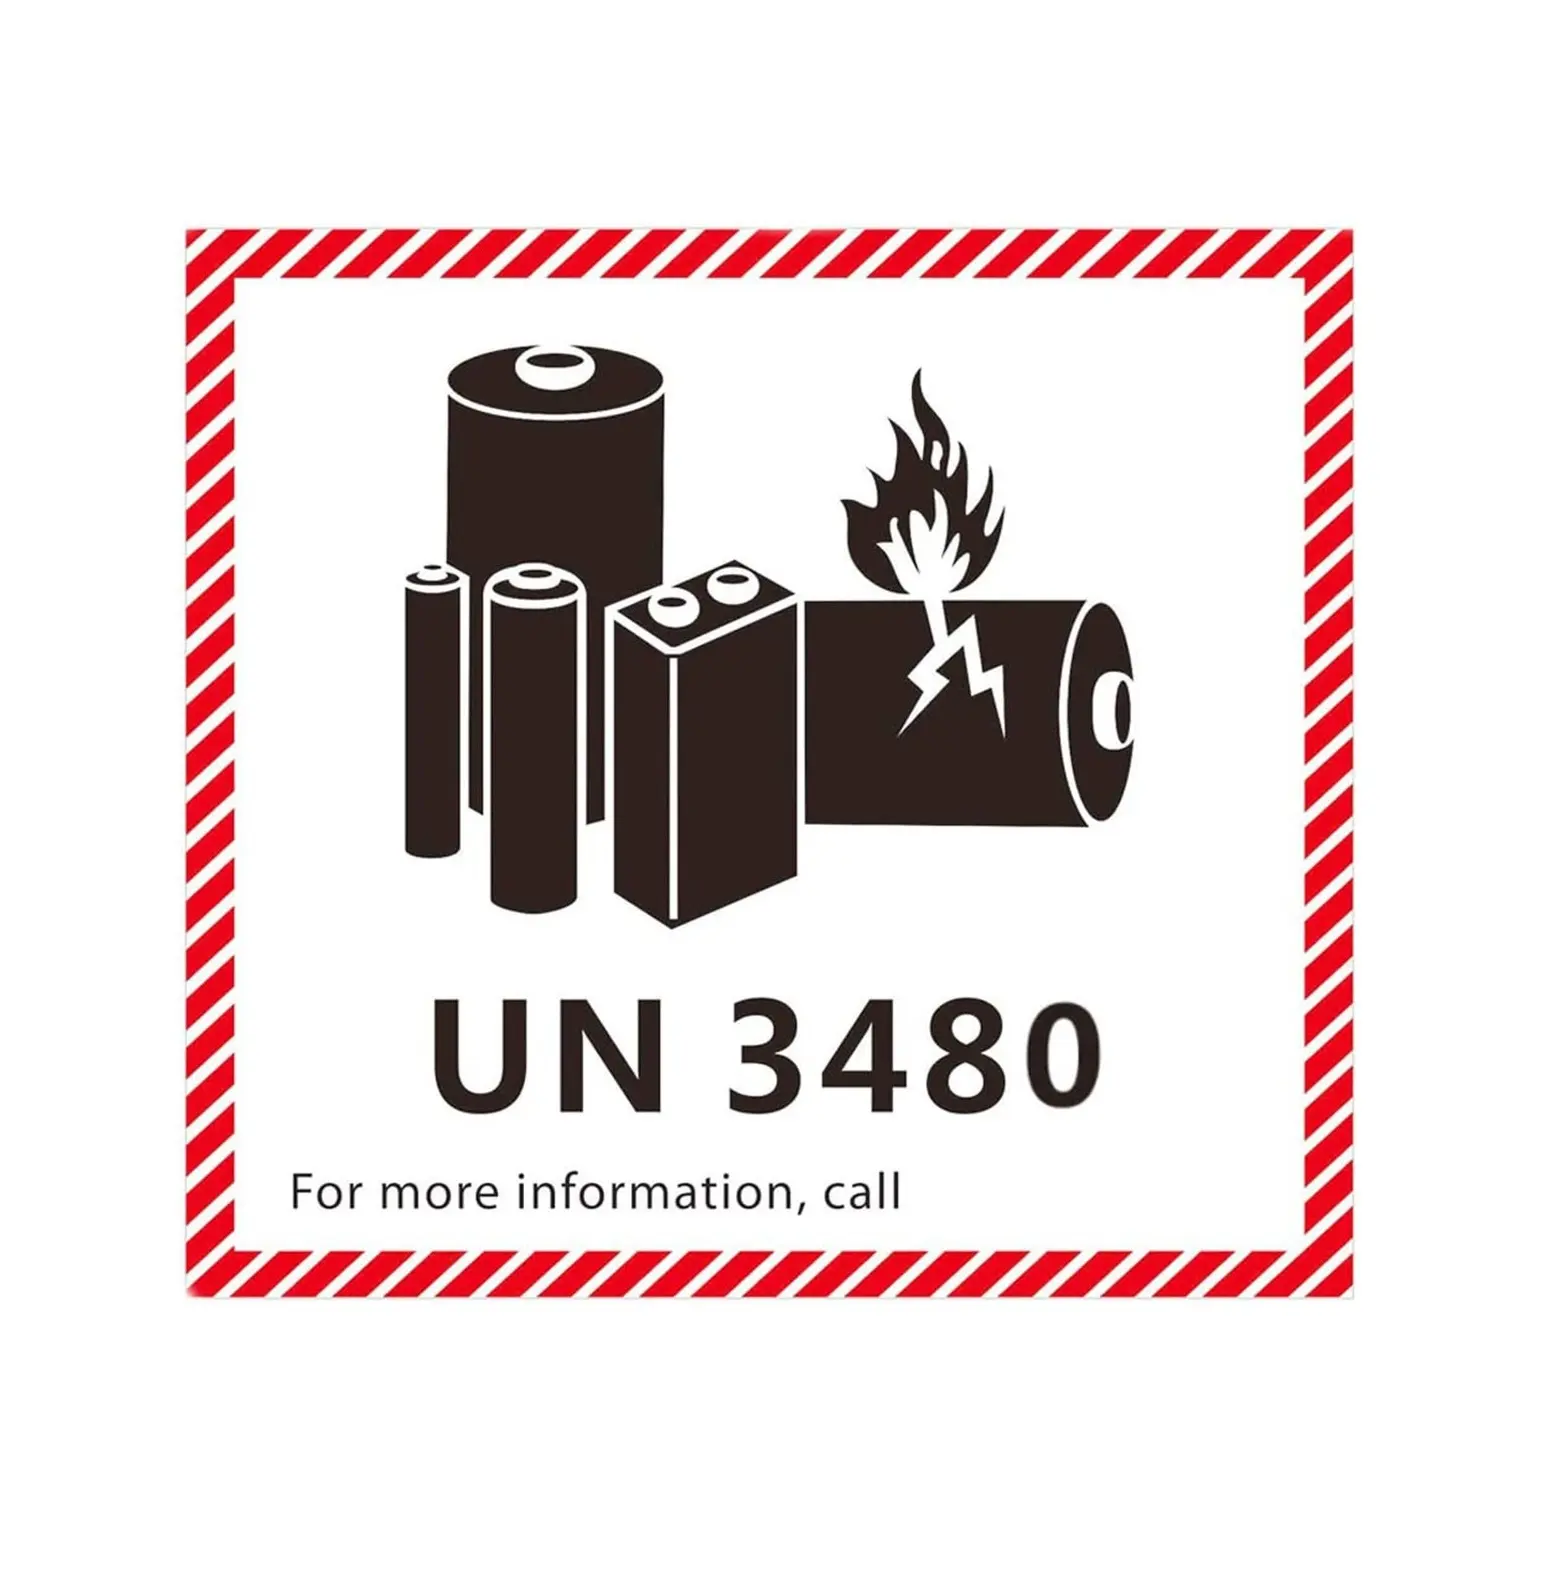 UN3480 Hot selling lithium ion battery transport fire safety sign attention warning label dangerous goods reminder sticker